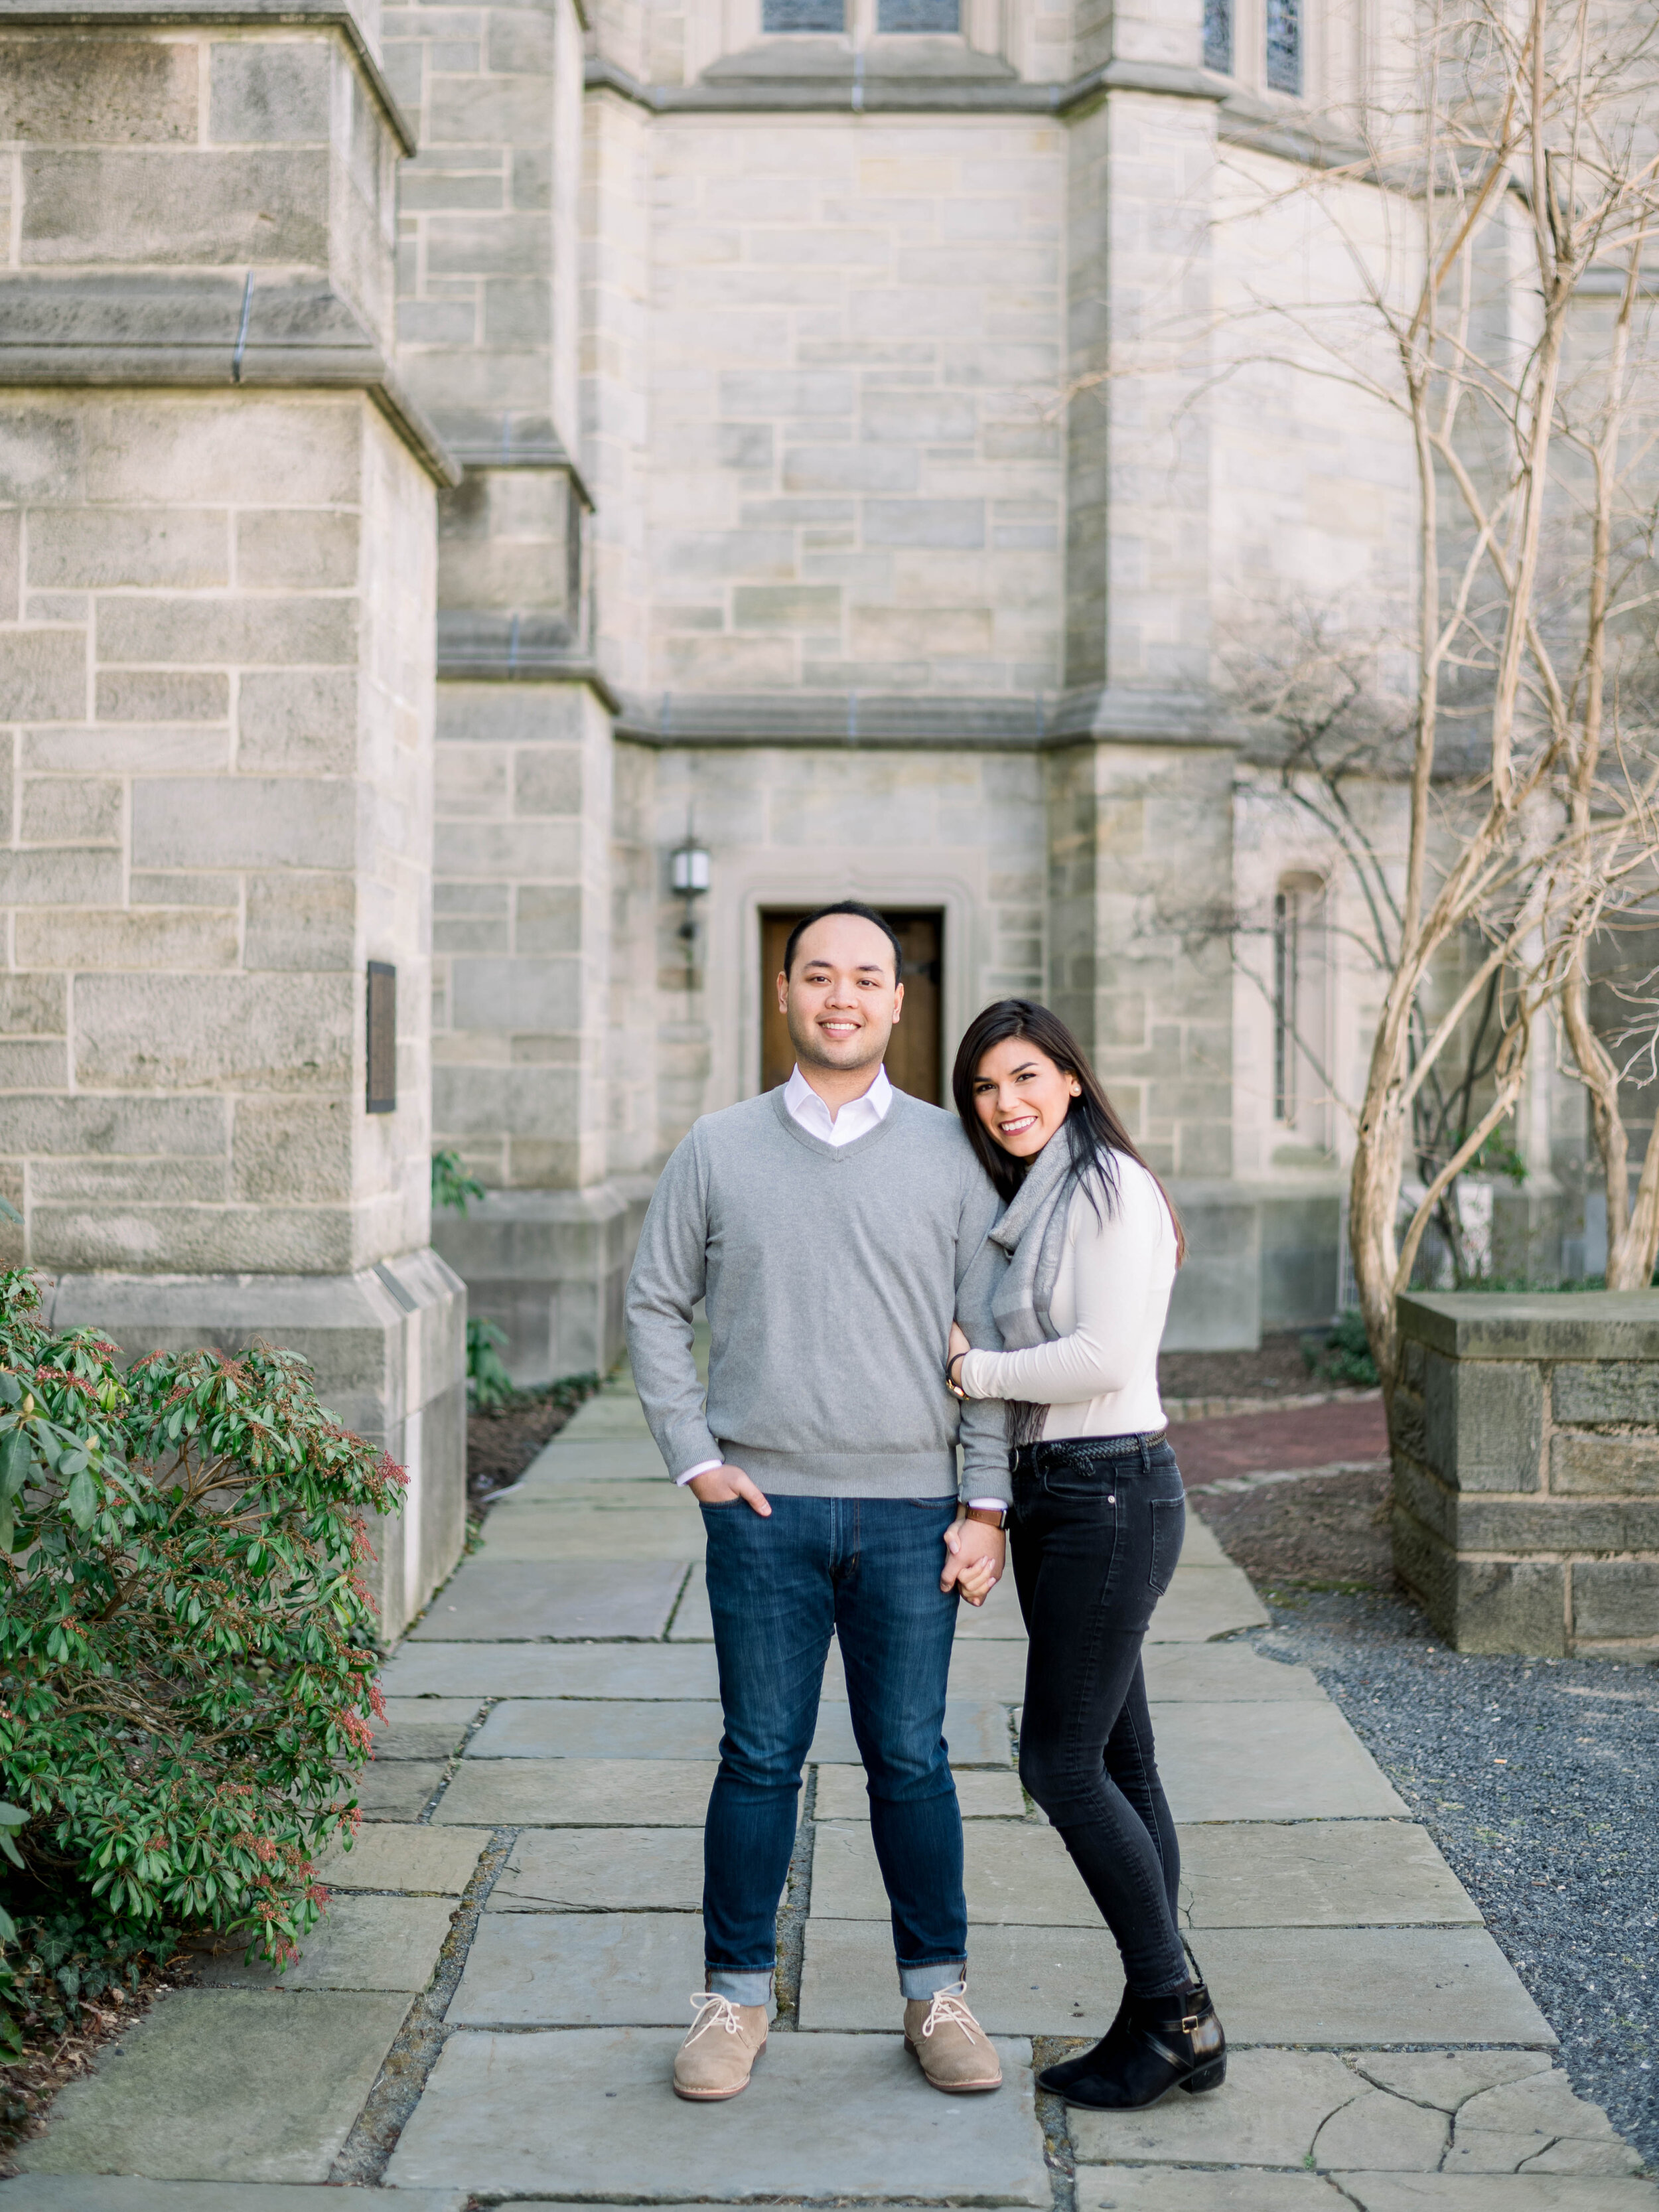 Outdoor lifestyle couples session with coffee, shopping in Princeton New Jersey on Princeton University Campus by Liz Andolina Photography